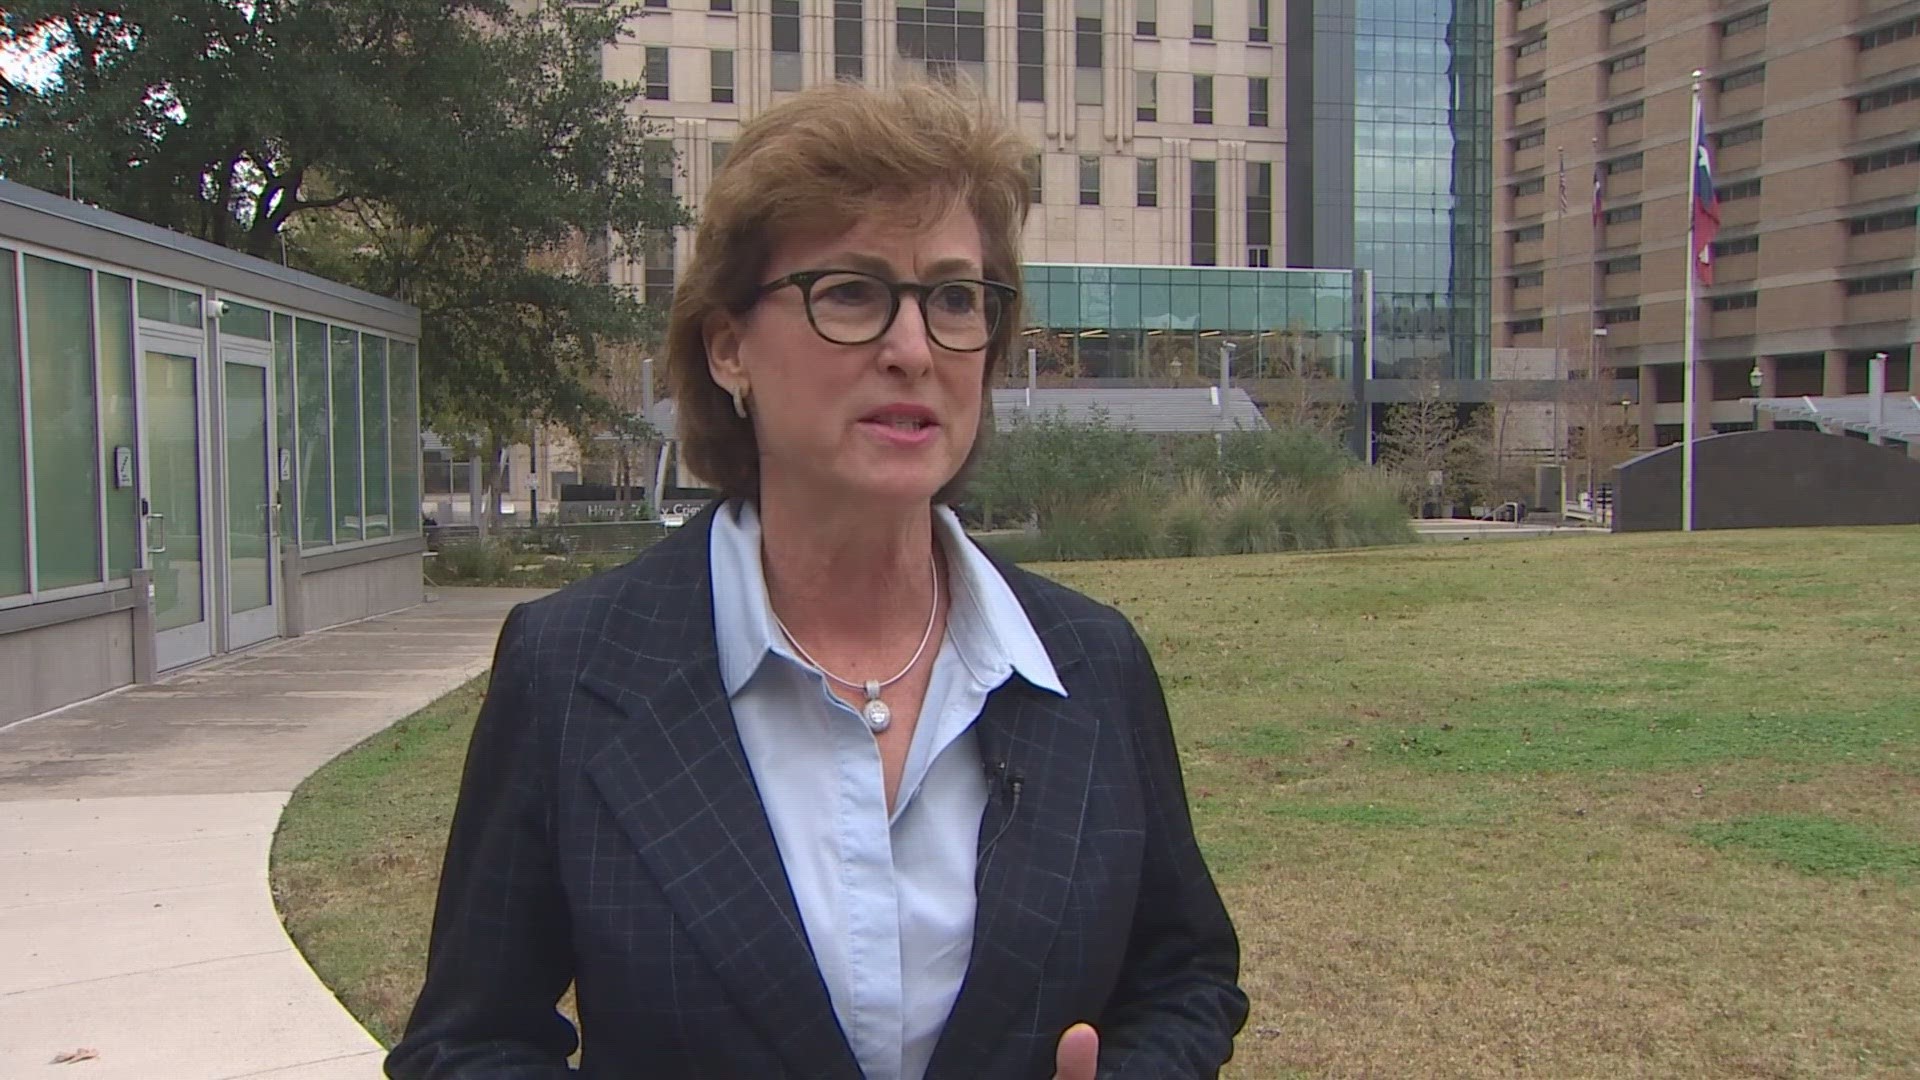 Harris County Democrats voted 129 to 61 to admonish District Attorney Kim Ogg for how she's doing her job.